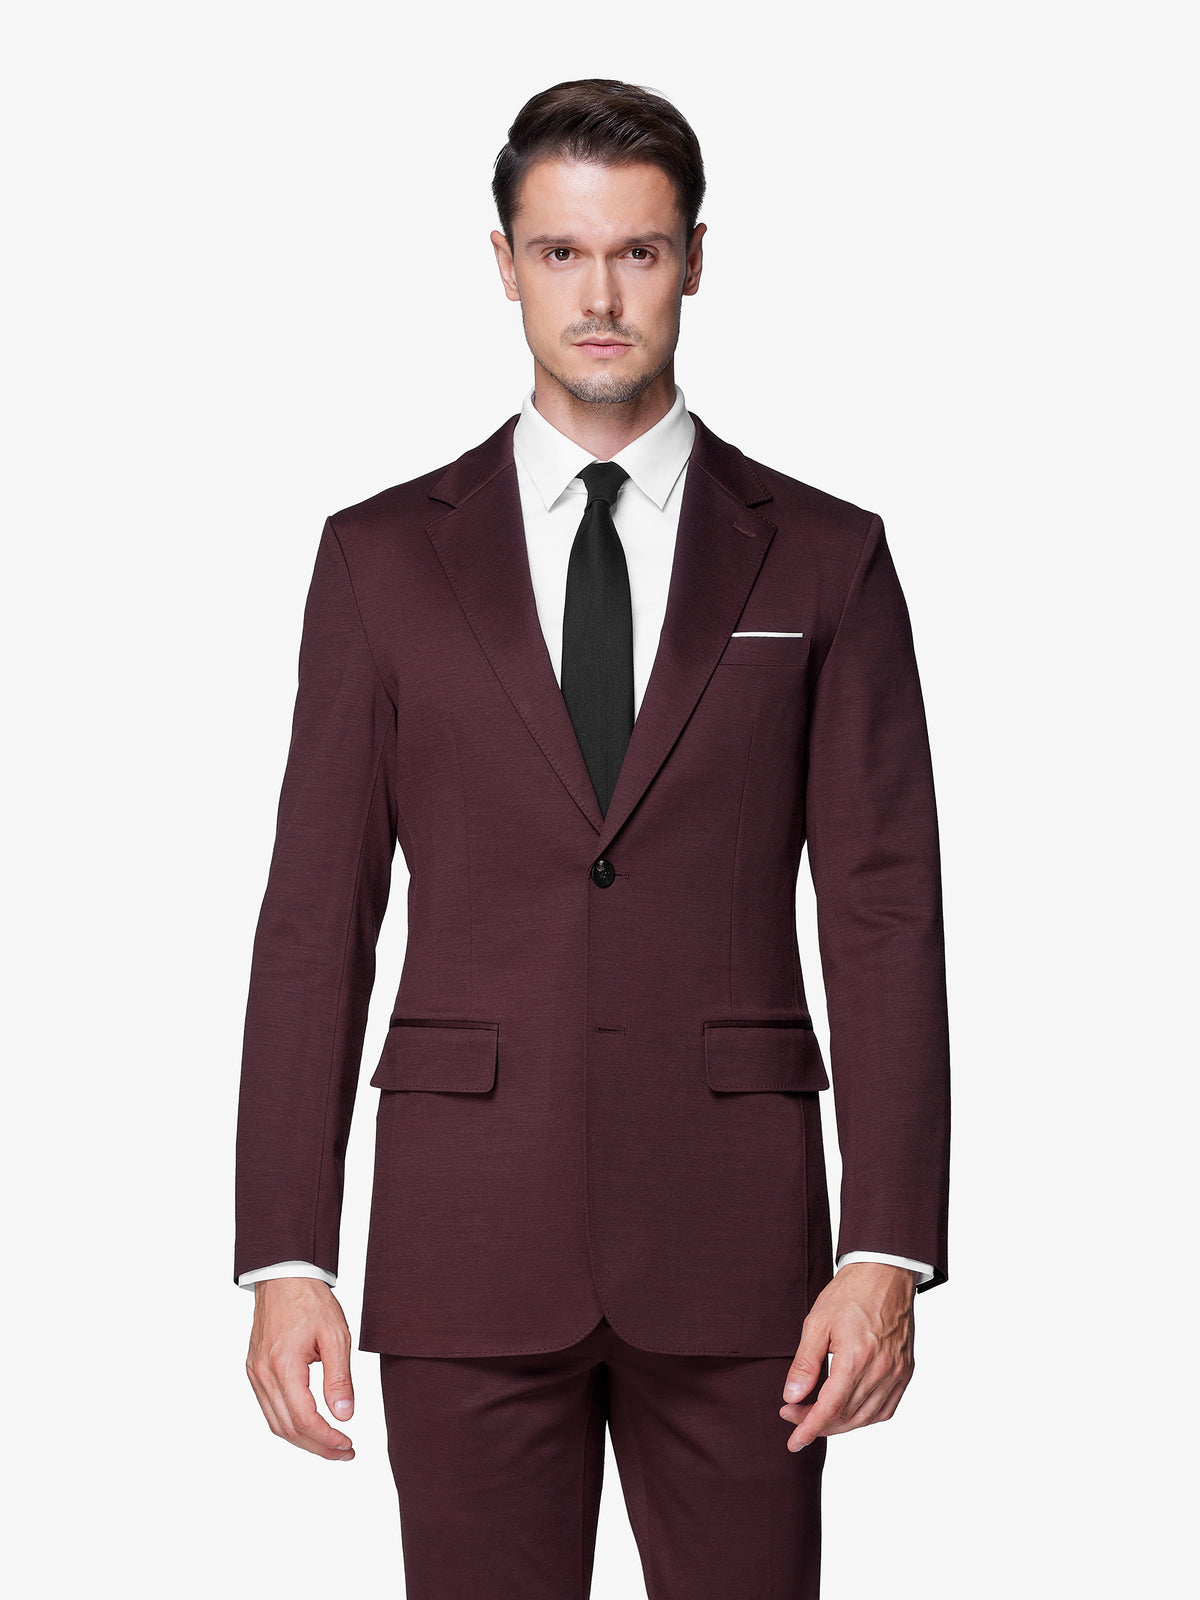 JELTOIN Mens Burgundy Slim Fit Mens Burgundy Suit For Casual And Formal  Occasions Perfect For Weddings And Parties From Cukoula, $93.11 | DHgate.Com